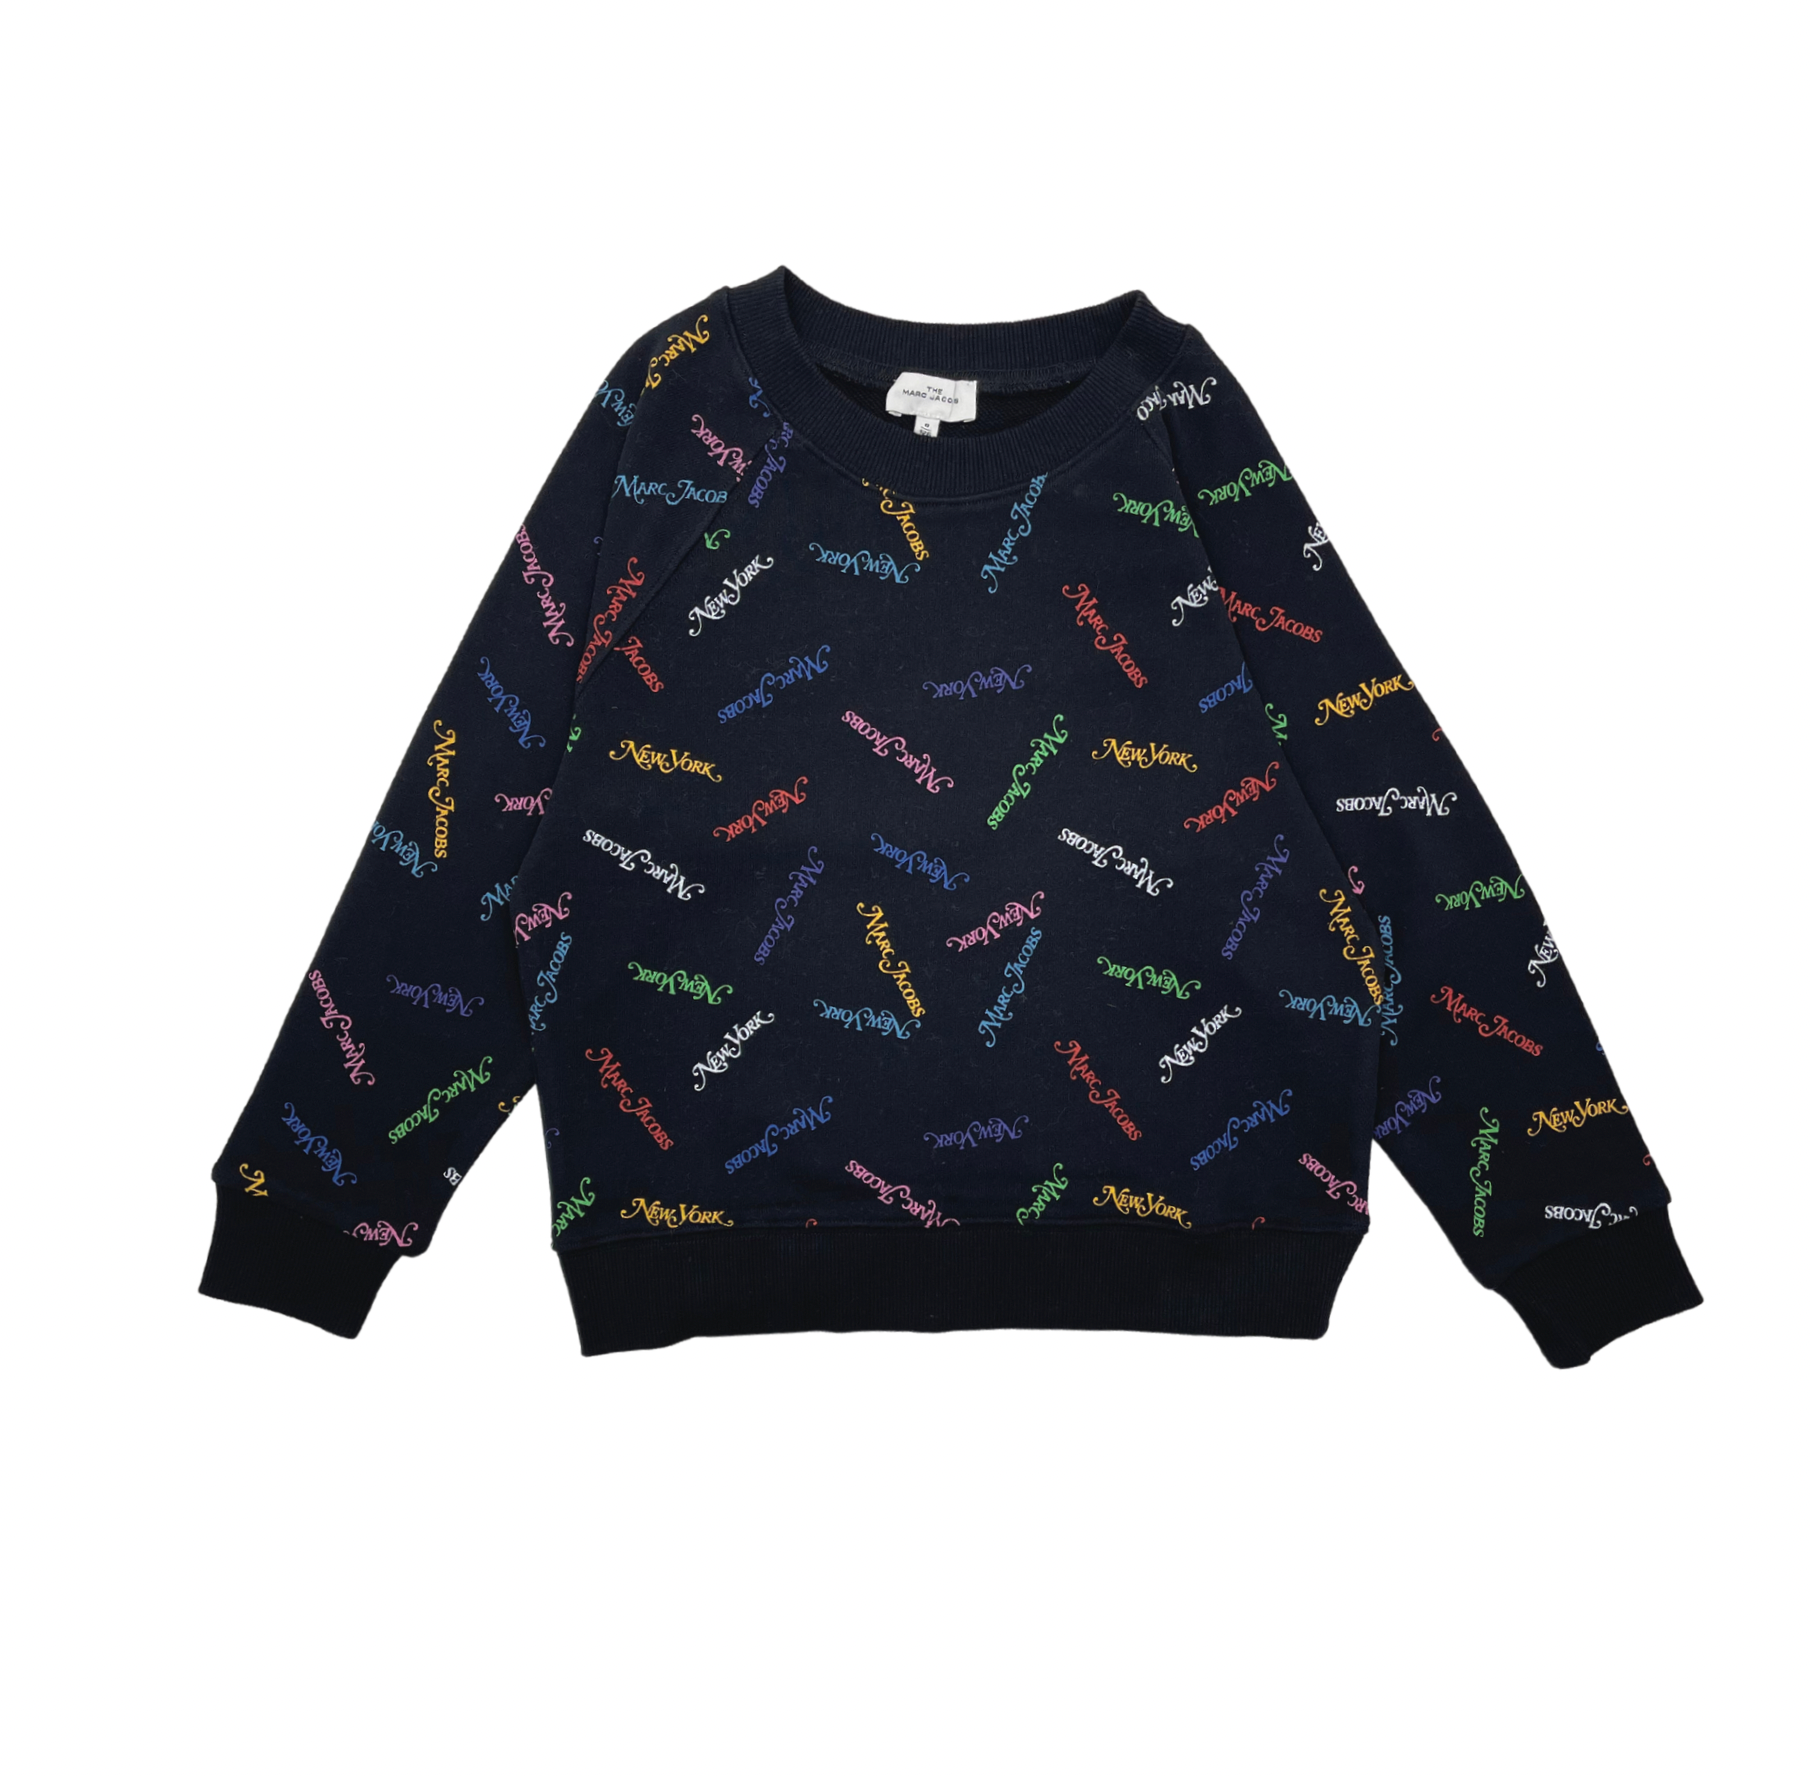 THE MARC JACOBS - Sweat "New York" - 8 ans